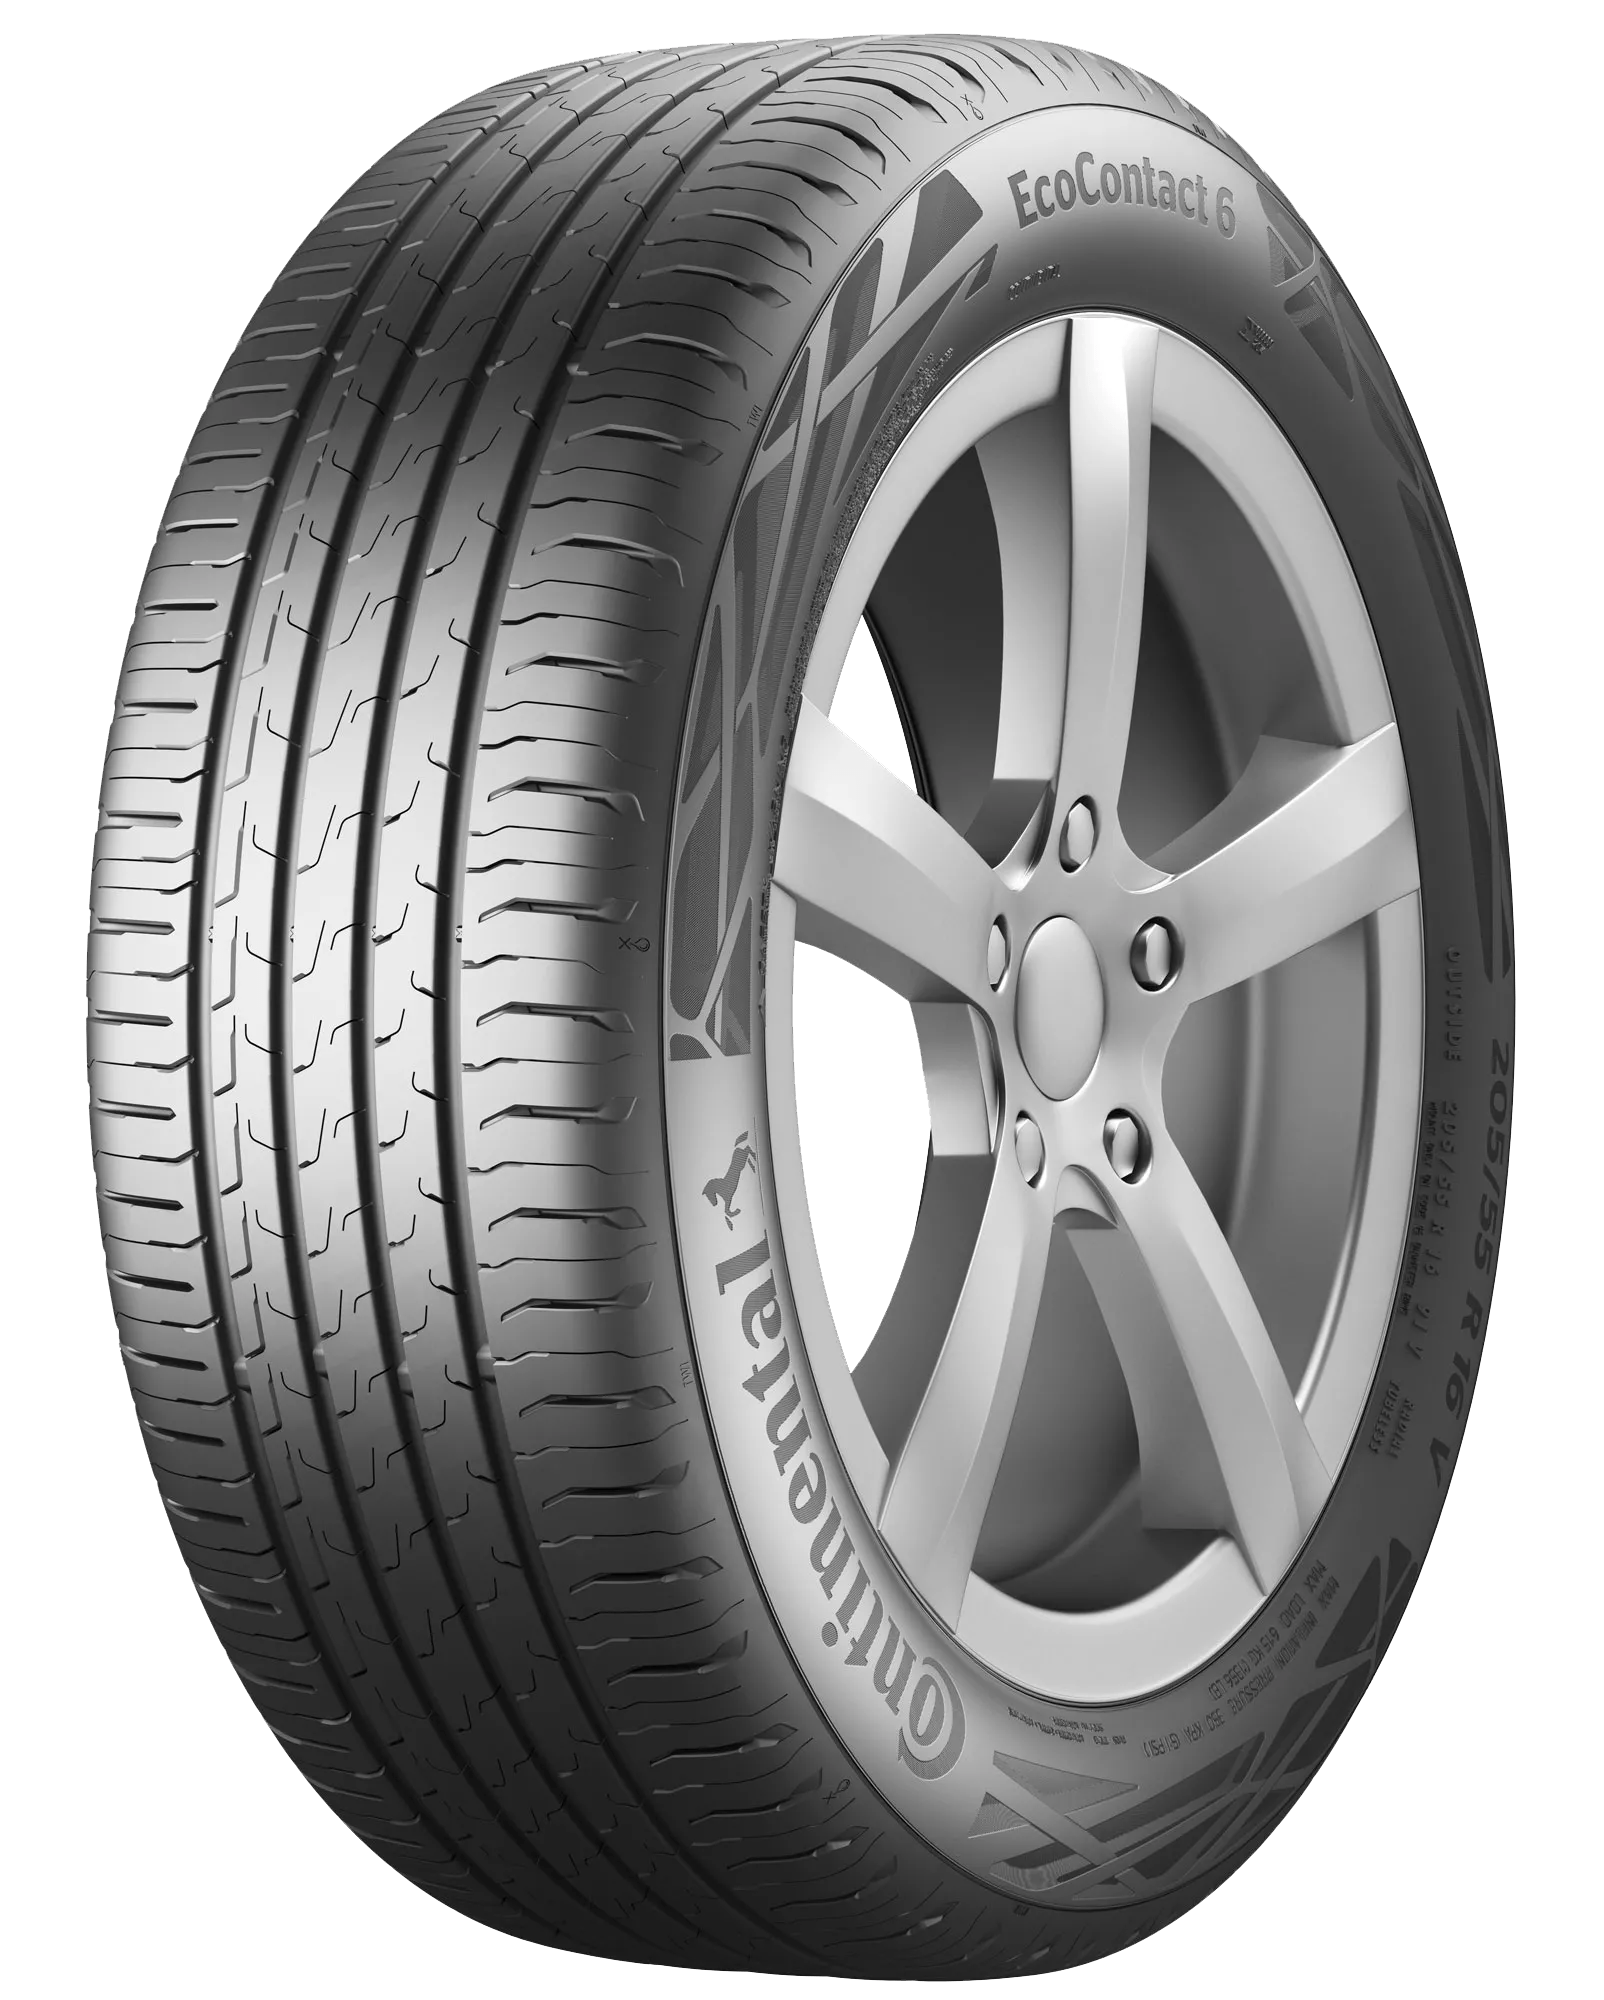 225/55R18 Continental EcoContact 6 Audi (AO) 102Y Tyre